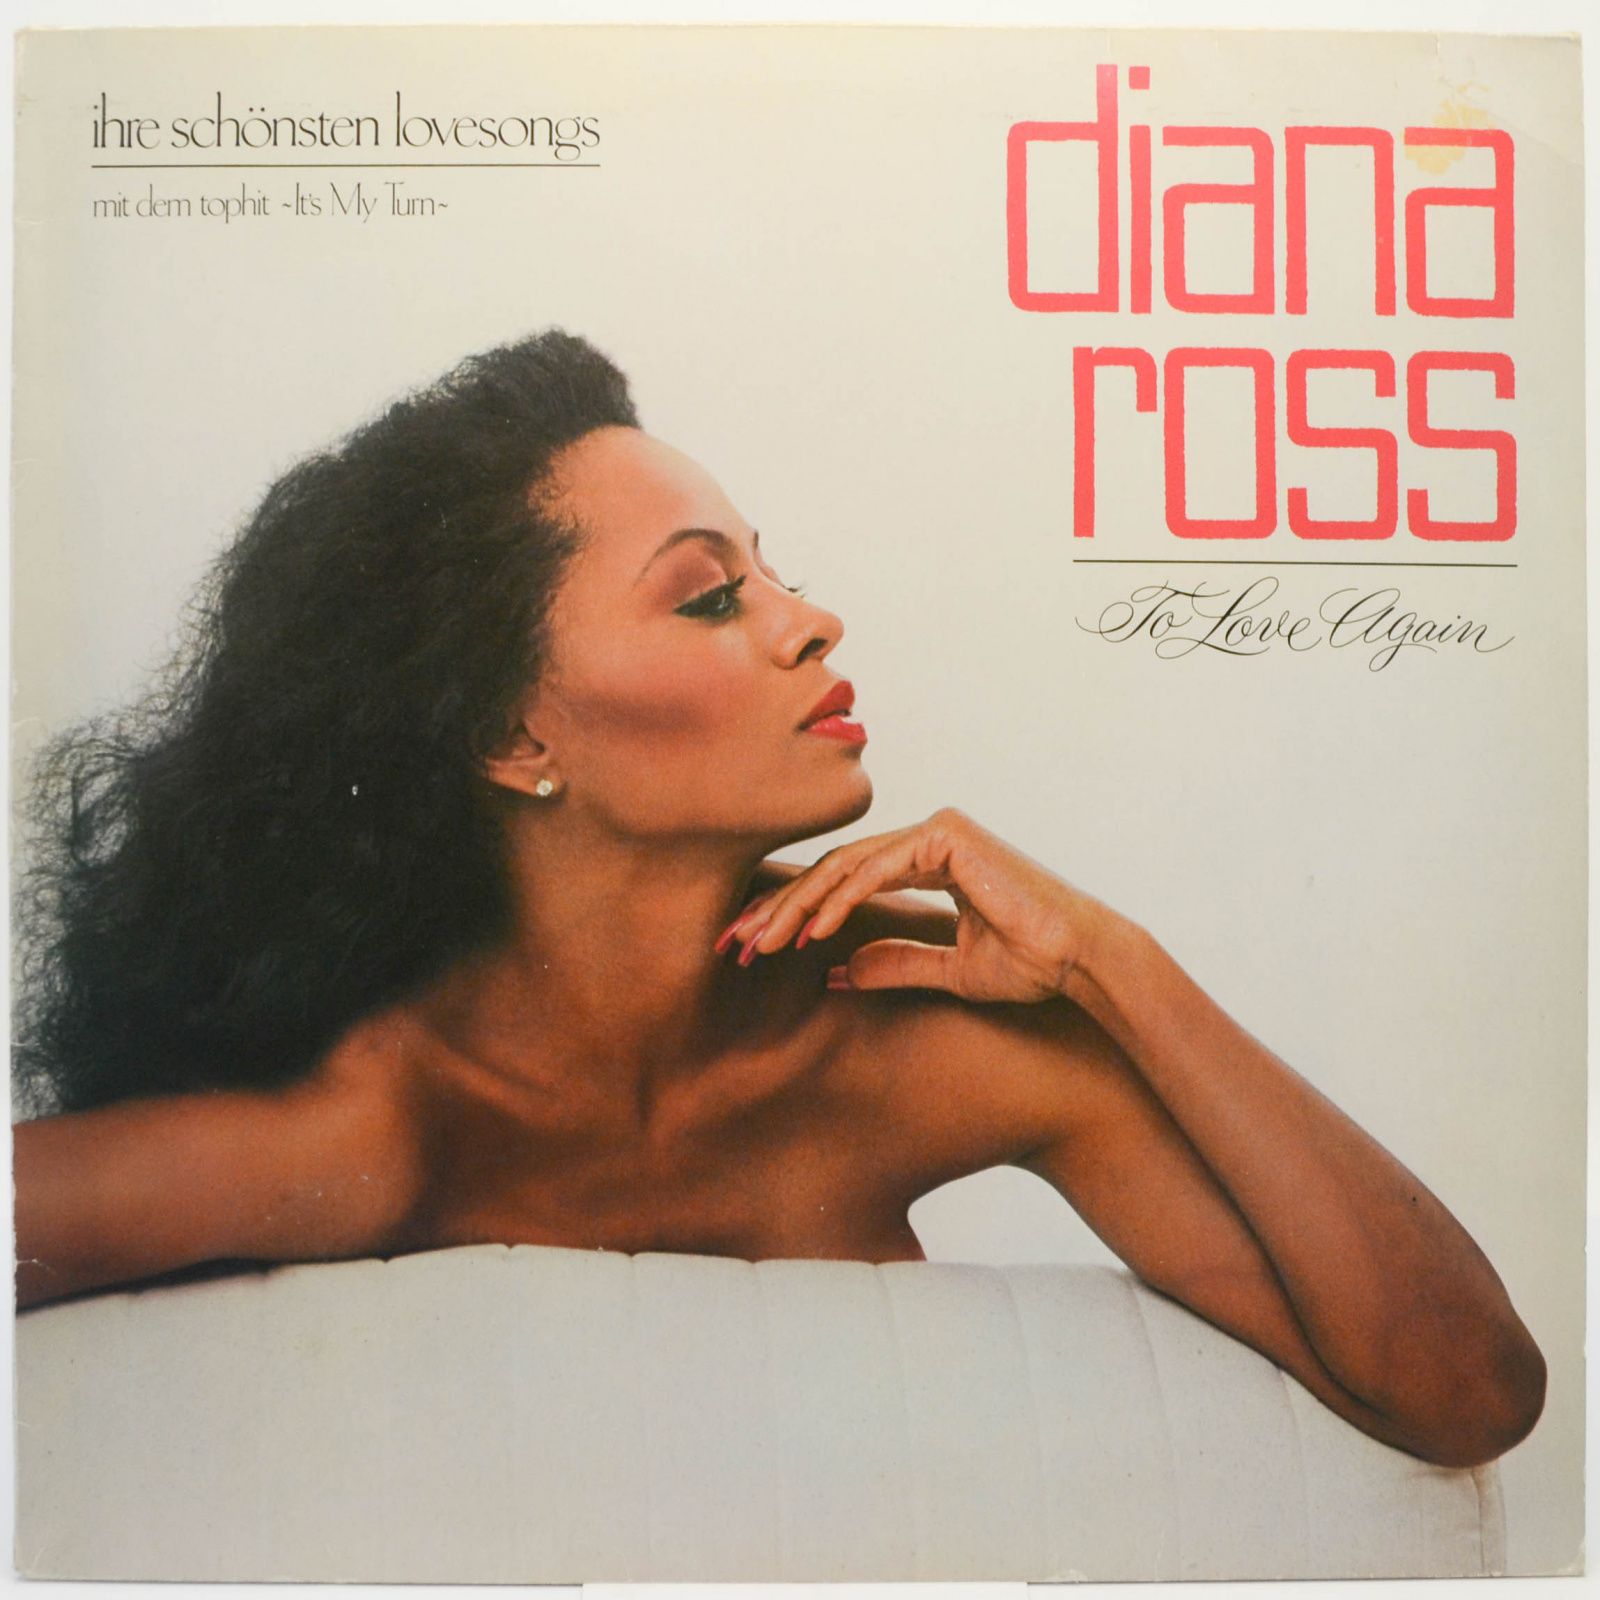 Diana Ross — To Love Again, 1981